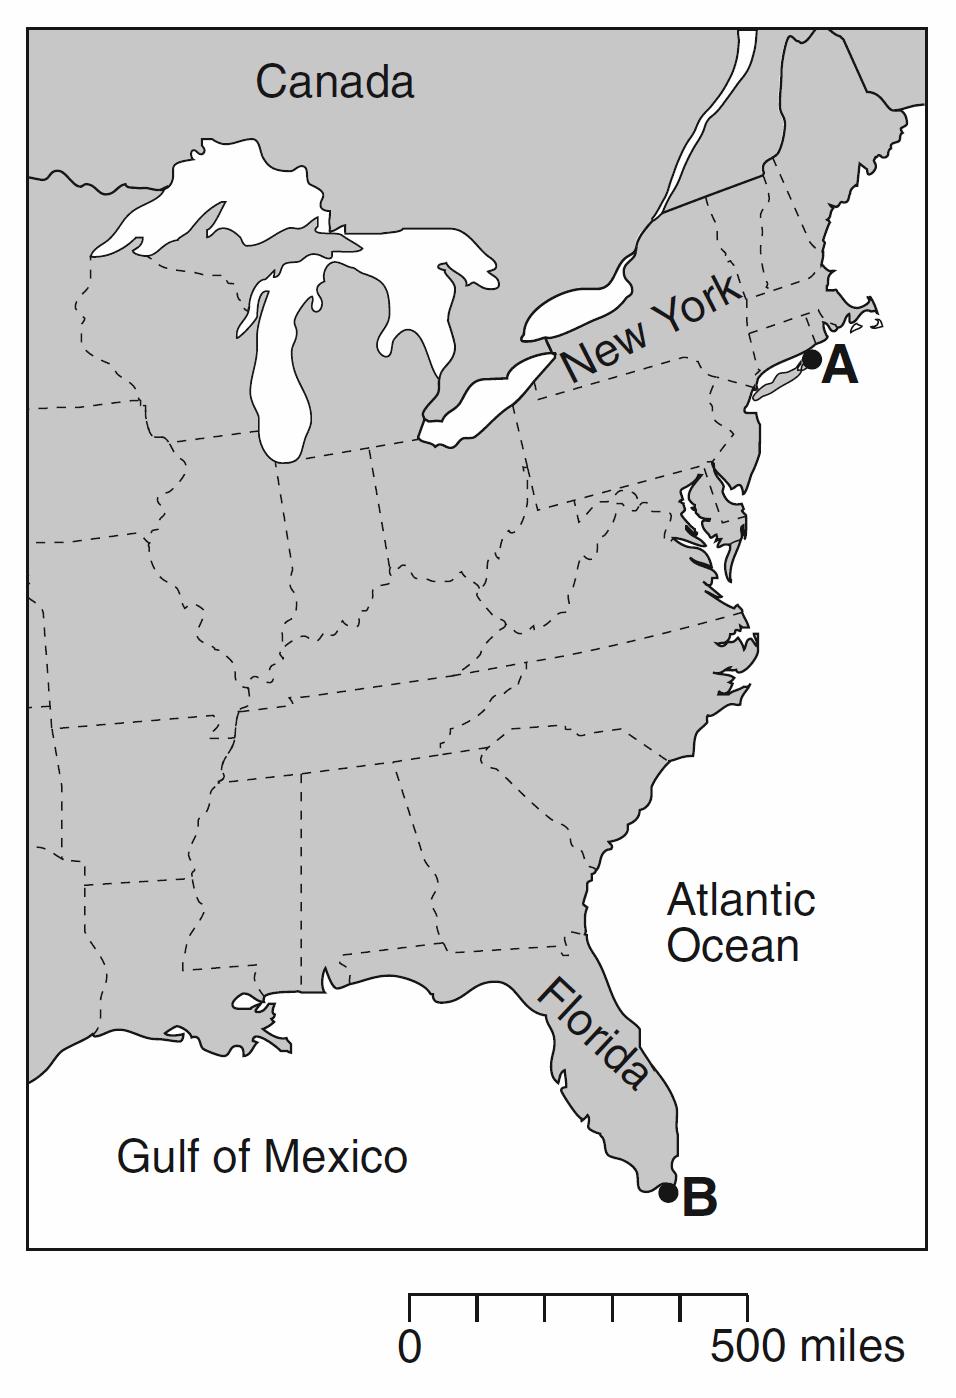 65. The map below shows an eastern portion of North America. Points A and B represent locations on the eastern shoreline. 68.